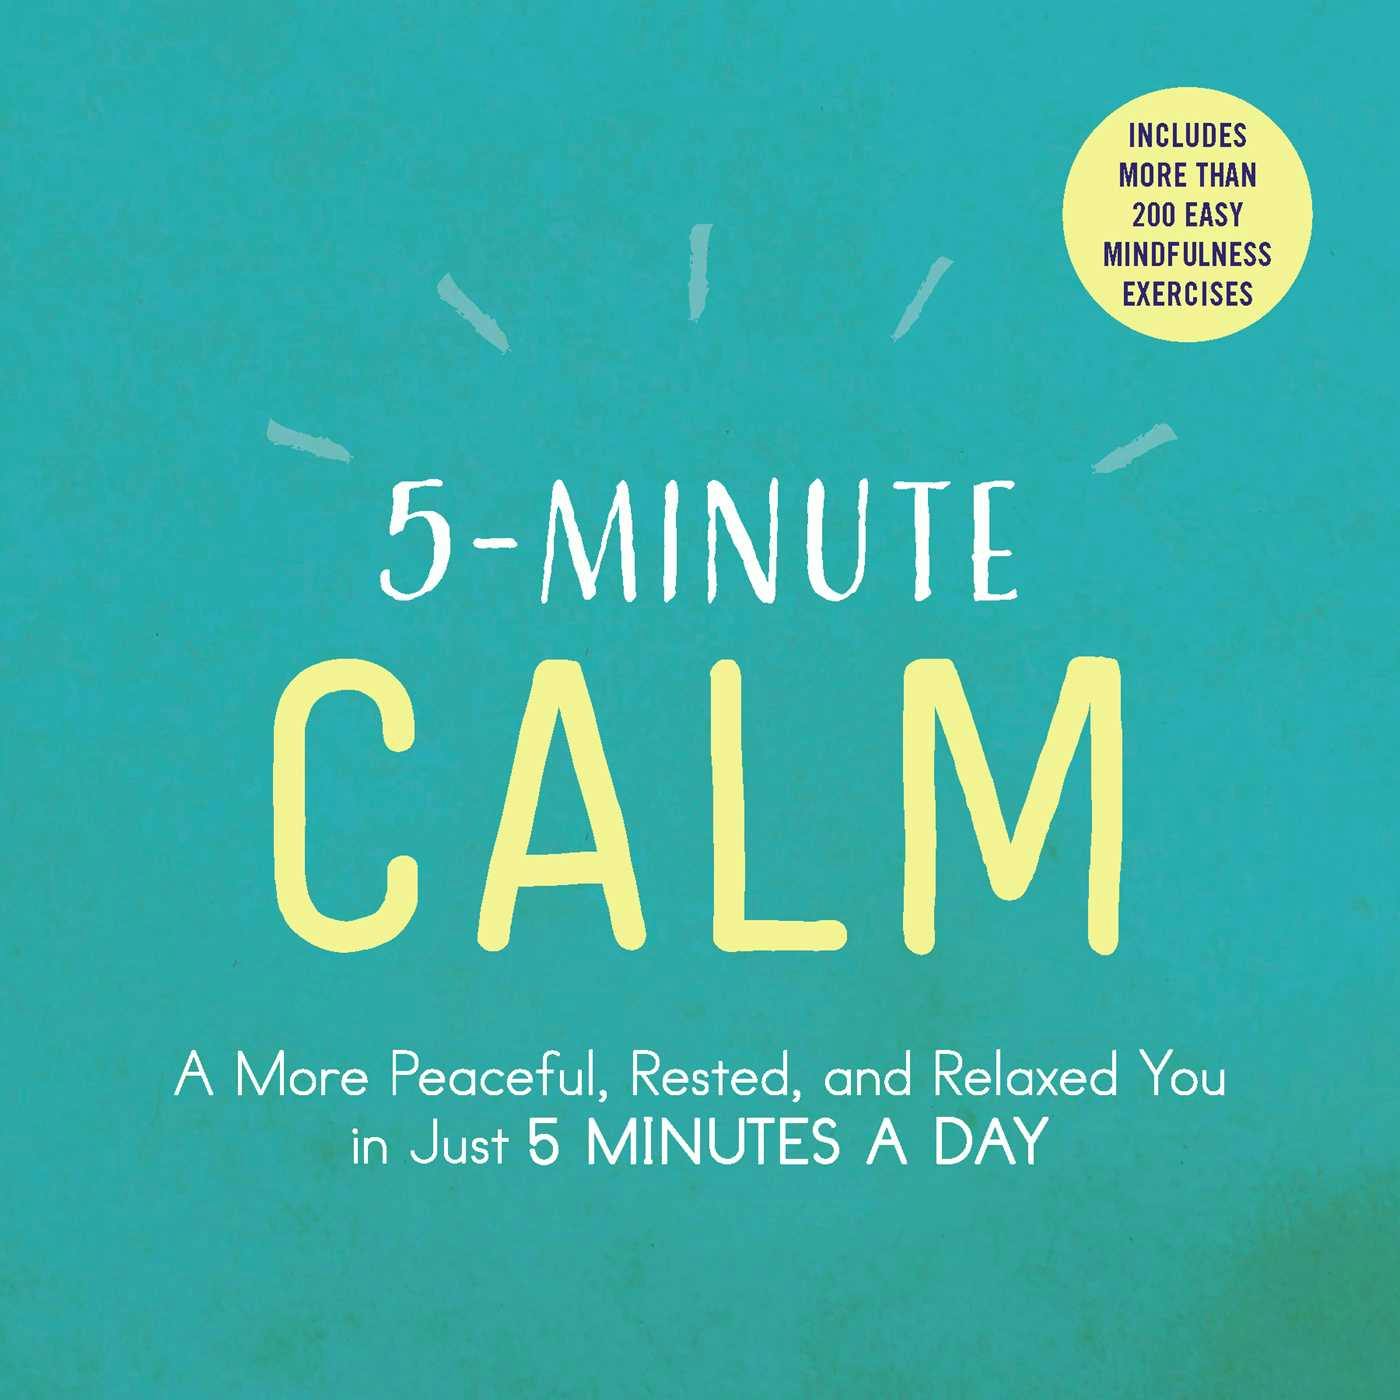 5-Minute Calm: A More Peaceful, Rested, and Relaxed You in Just 5 Minutes a Day - undefined